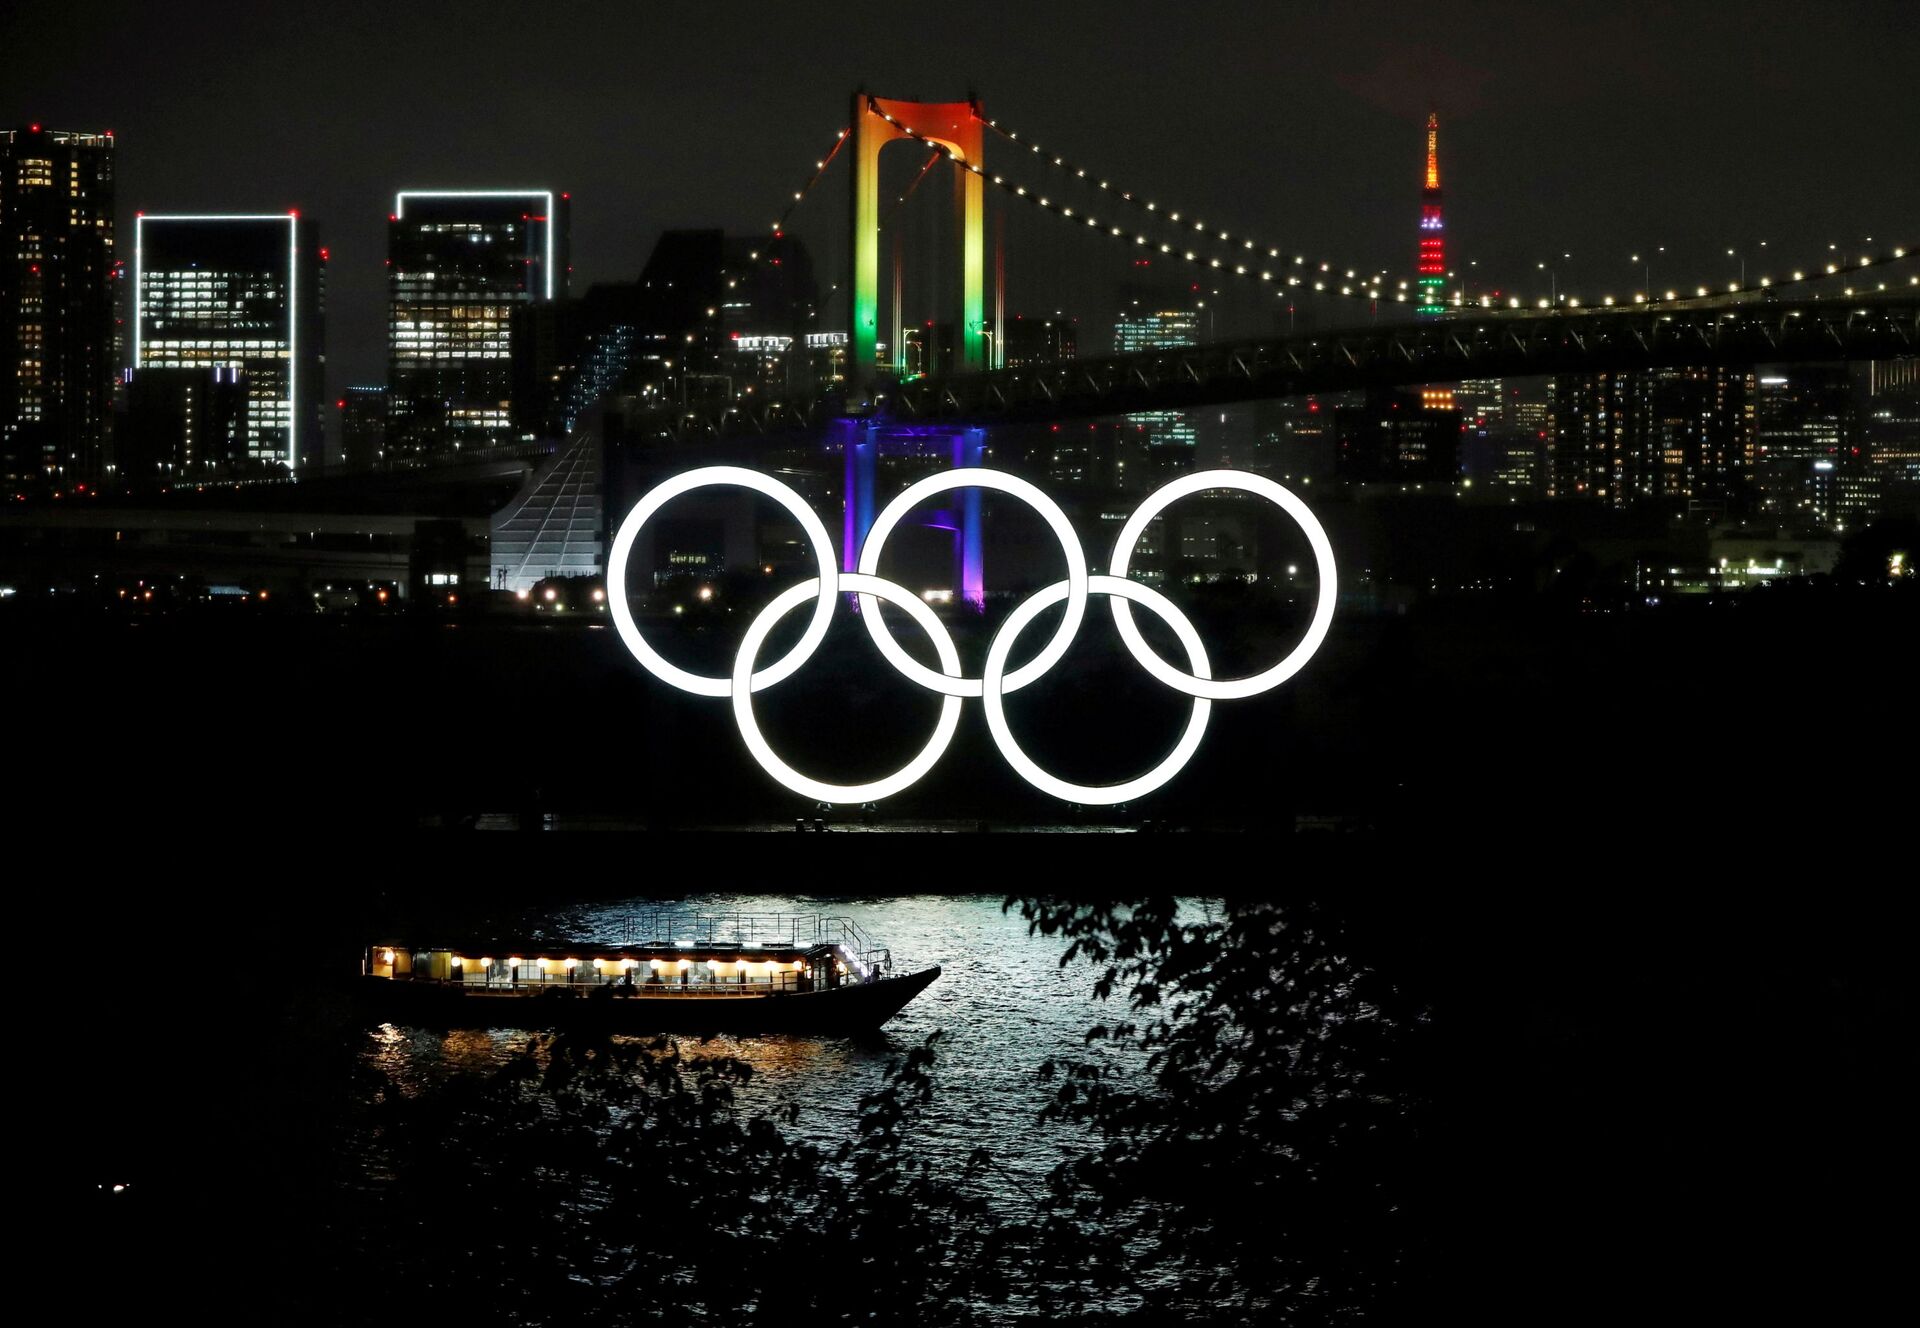 Olympic Organisers to Take Tokyo Torch Relay Off Public Roads, Reports Say - Sputnik International, 1920, 29.06.2021